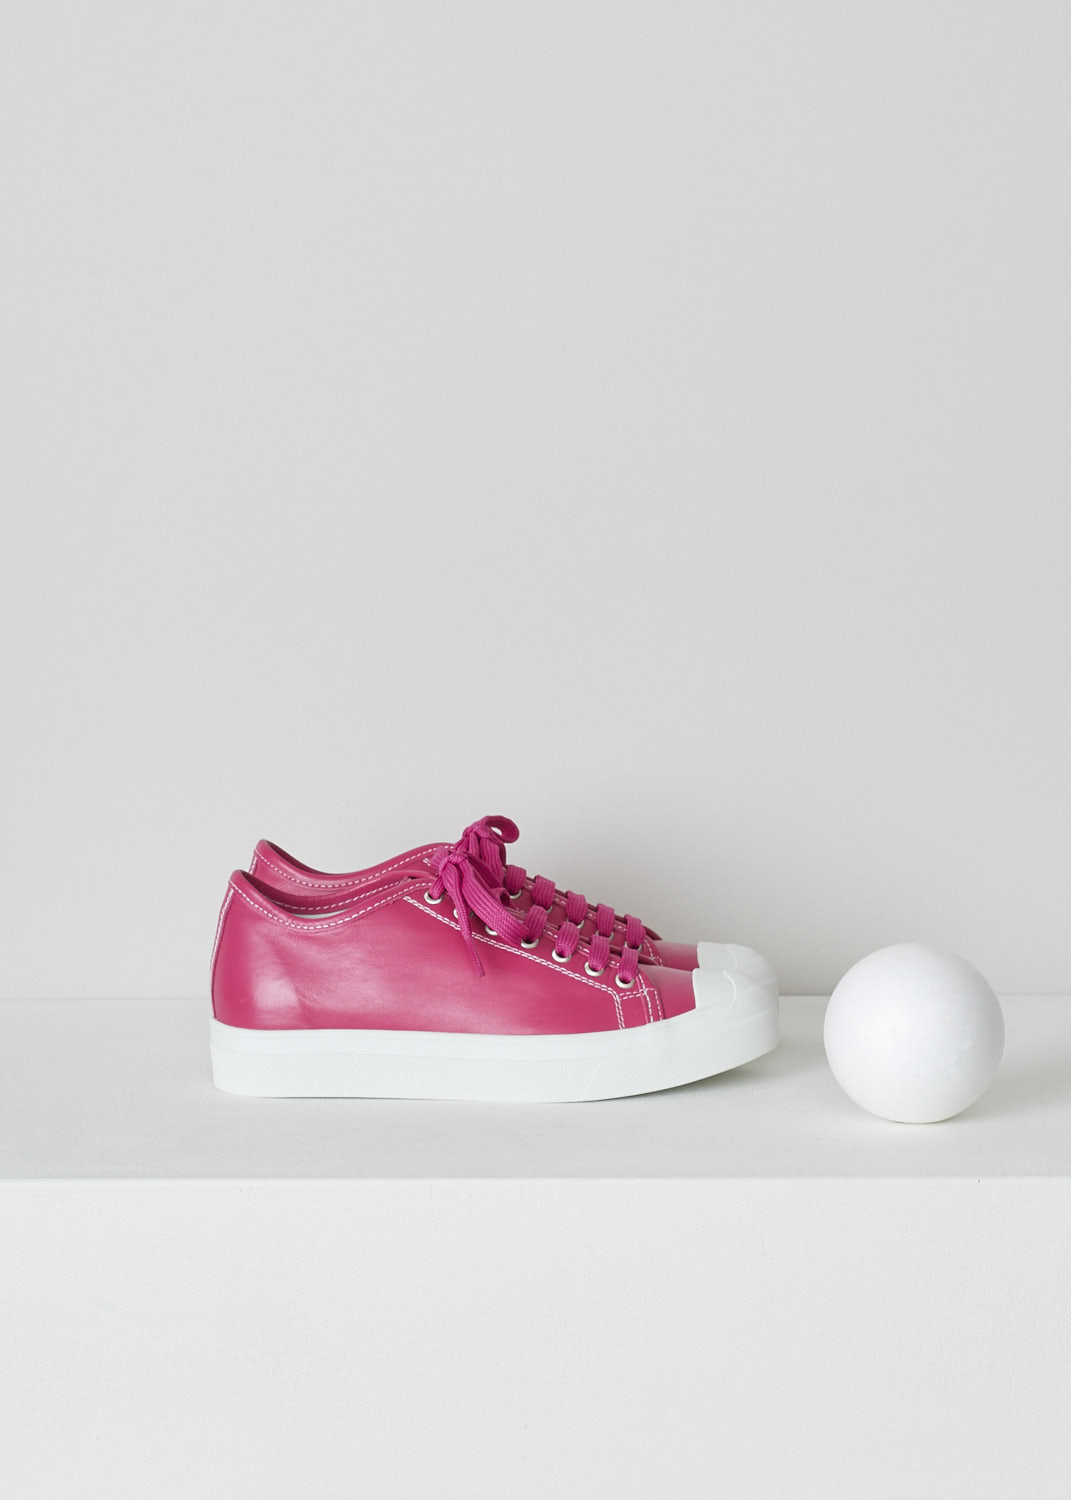 SOFIE Dâ€™HOORE, FUCHSIA PINK LEATHER SHOES, FOLK_LSNOW_FUCHSIA, Pink, Side, These fuchsia pink leather sneakers feature a front lace-up closure with pink laces. These sneakers have a round toe with a white rubber toe cap that goes down into the white rubber sole. Contrasting white stitching is used throughout. The sneakers come with an additional pair of laces in white.
